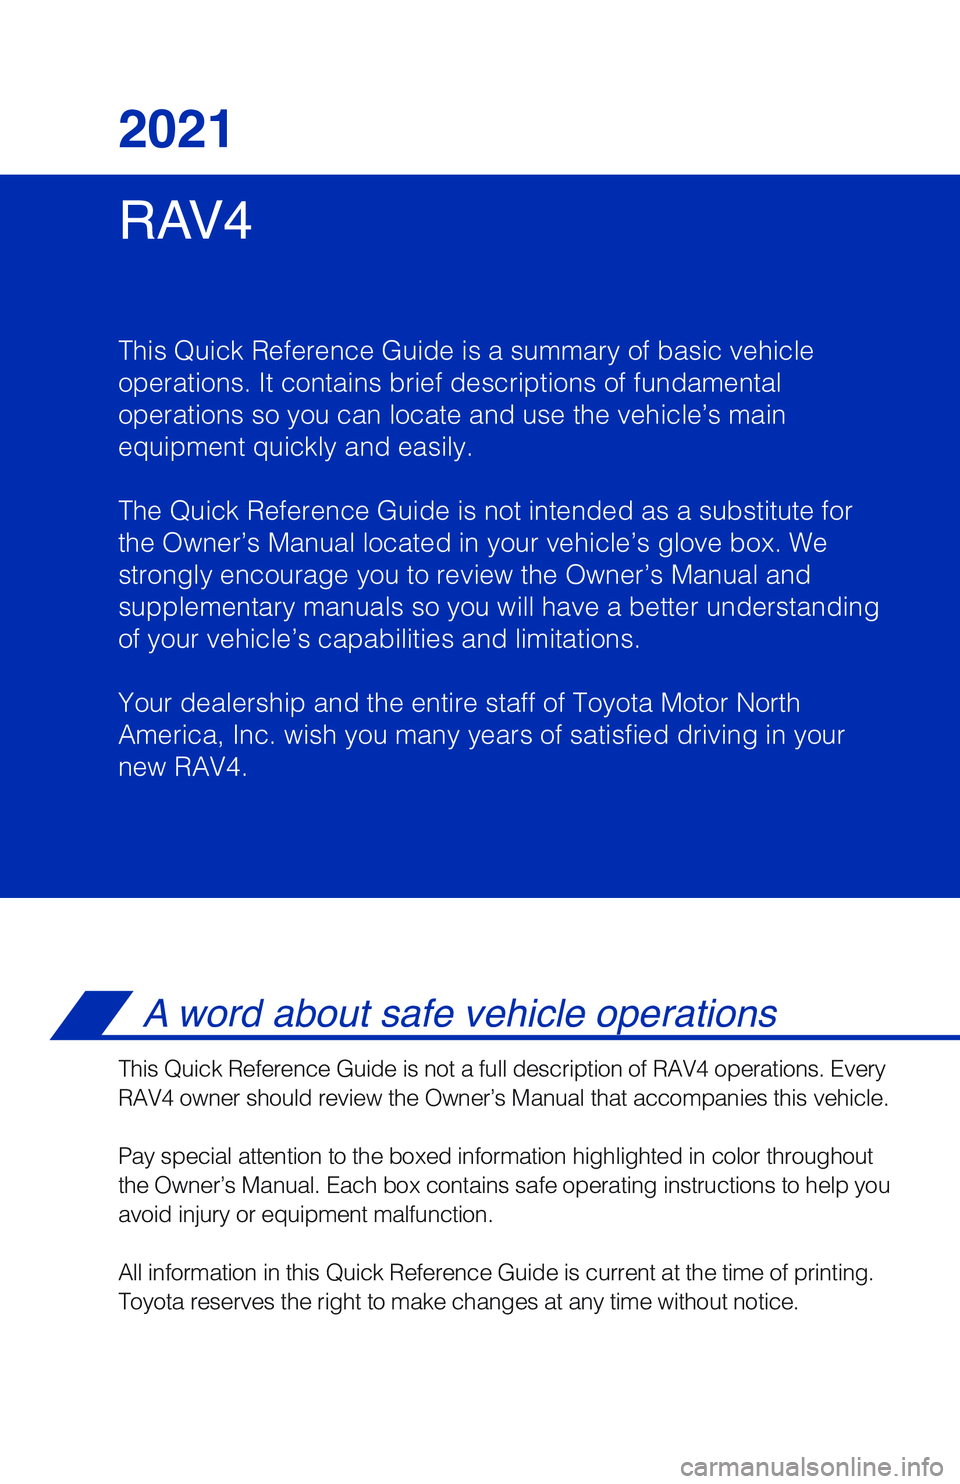 TOYOTA RAV4 2021  Owners Manual (in English) RAV4 2021
This Quick Reference Guide is a summary of basic vehicle
operations. It contains brief descriptions of fundamental
operations so you can locate and use the vehicle’s main 
equipment quickl